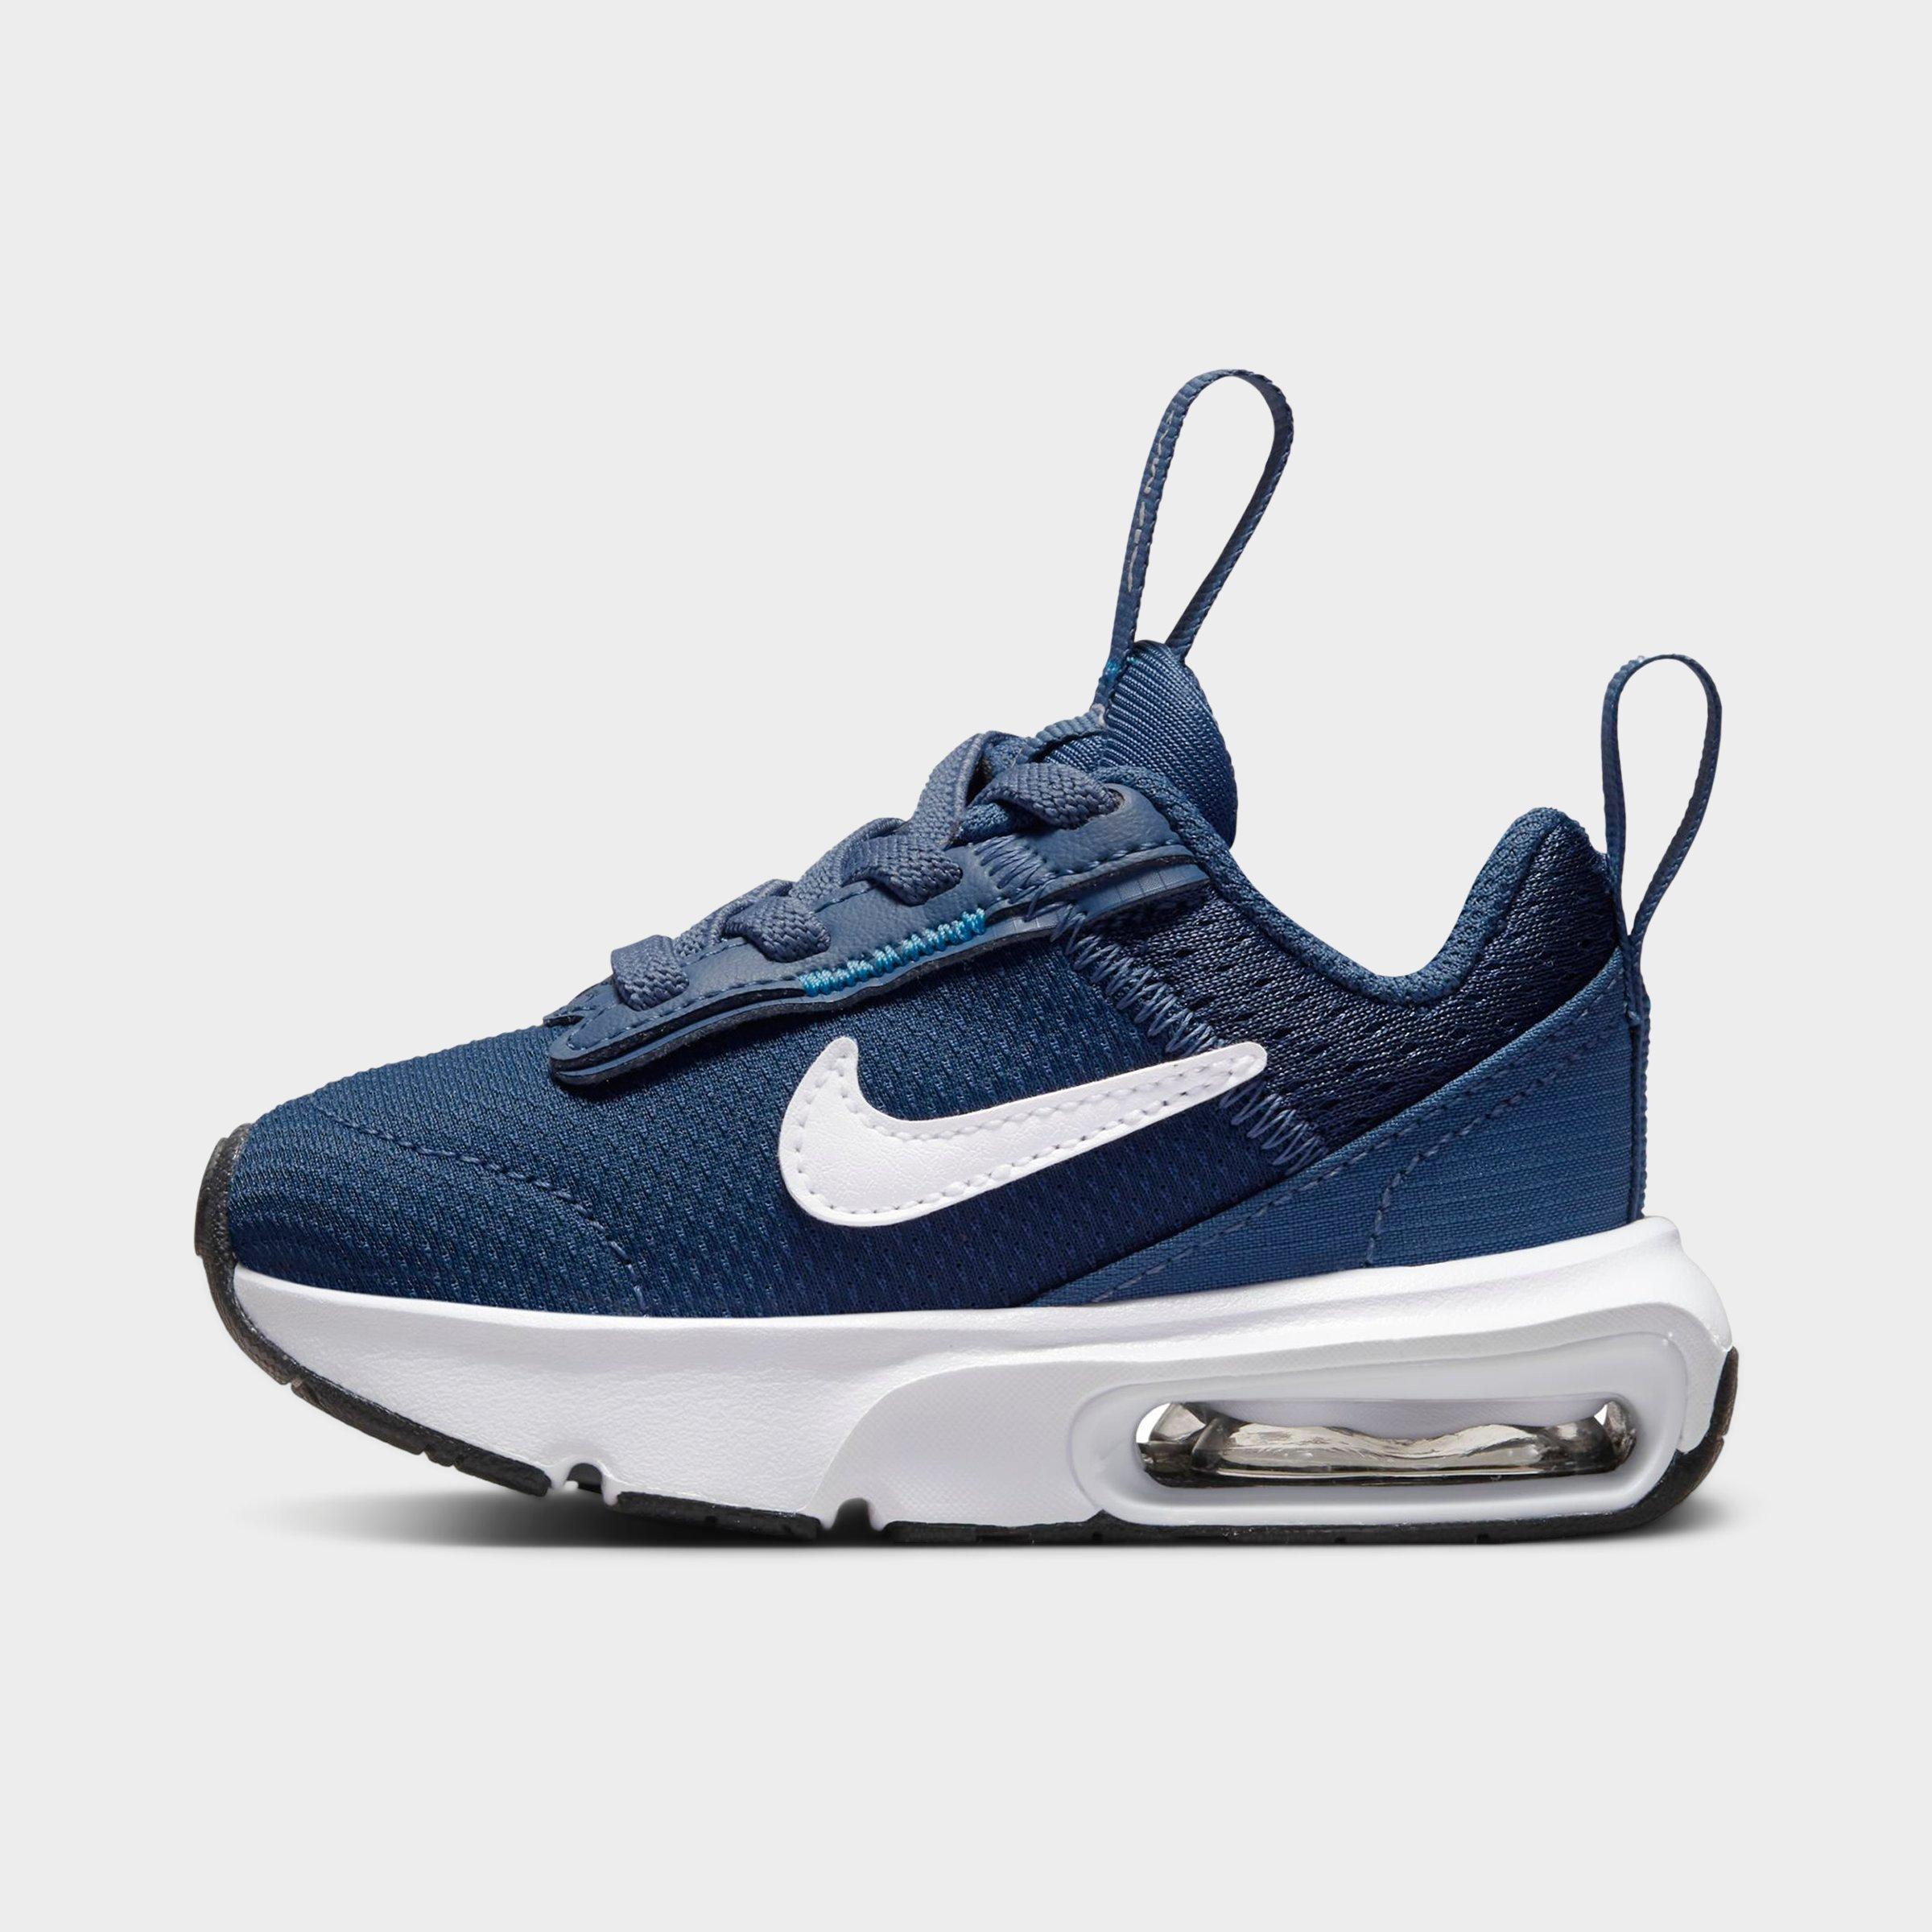 Nike Babies'  Kids' Toddler Air Max Intrlk Lite Stretch Lace Casual Shoes In Mystic Navy/light Photo Blue/black/white